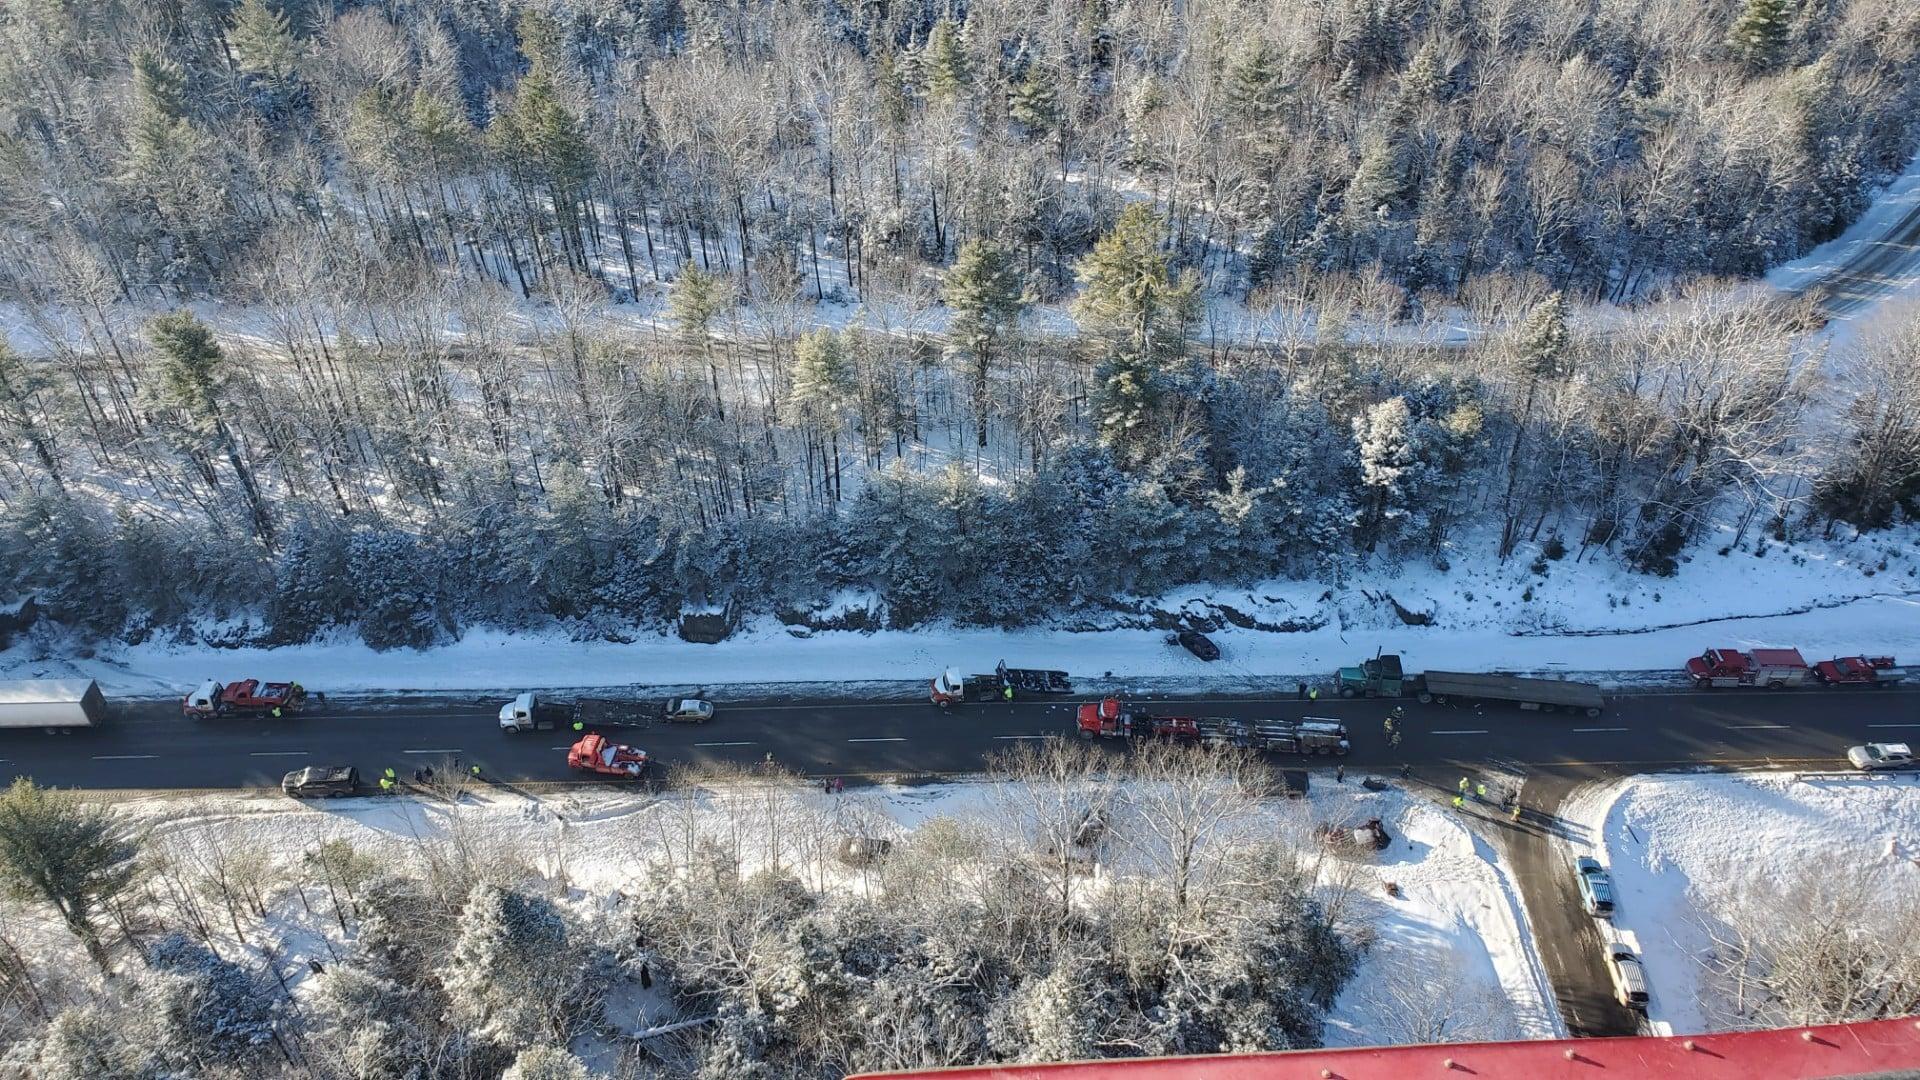 Helicopters have been dispatched to a crash involving dozens of cars on Interstate 95 in Maine.